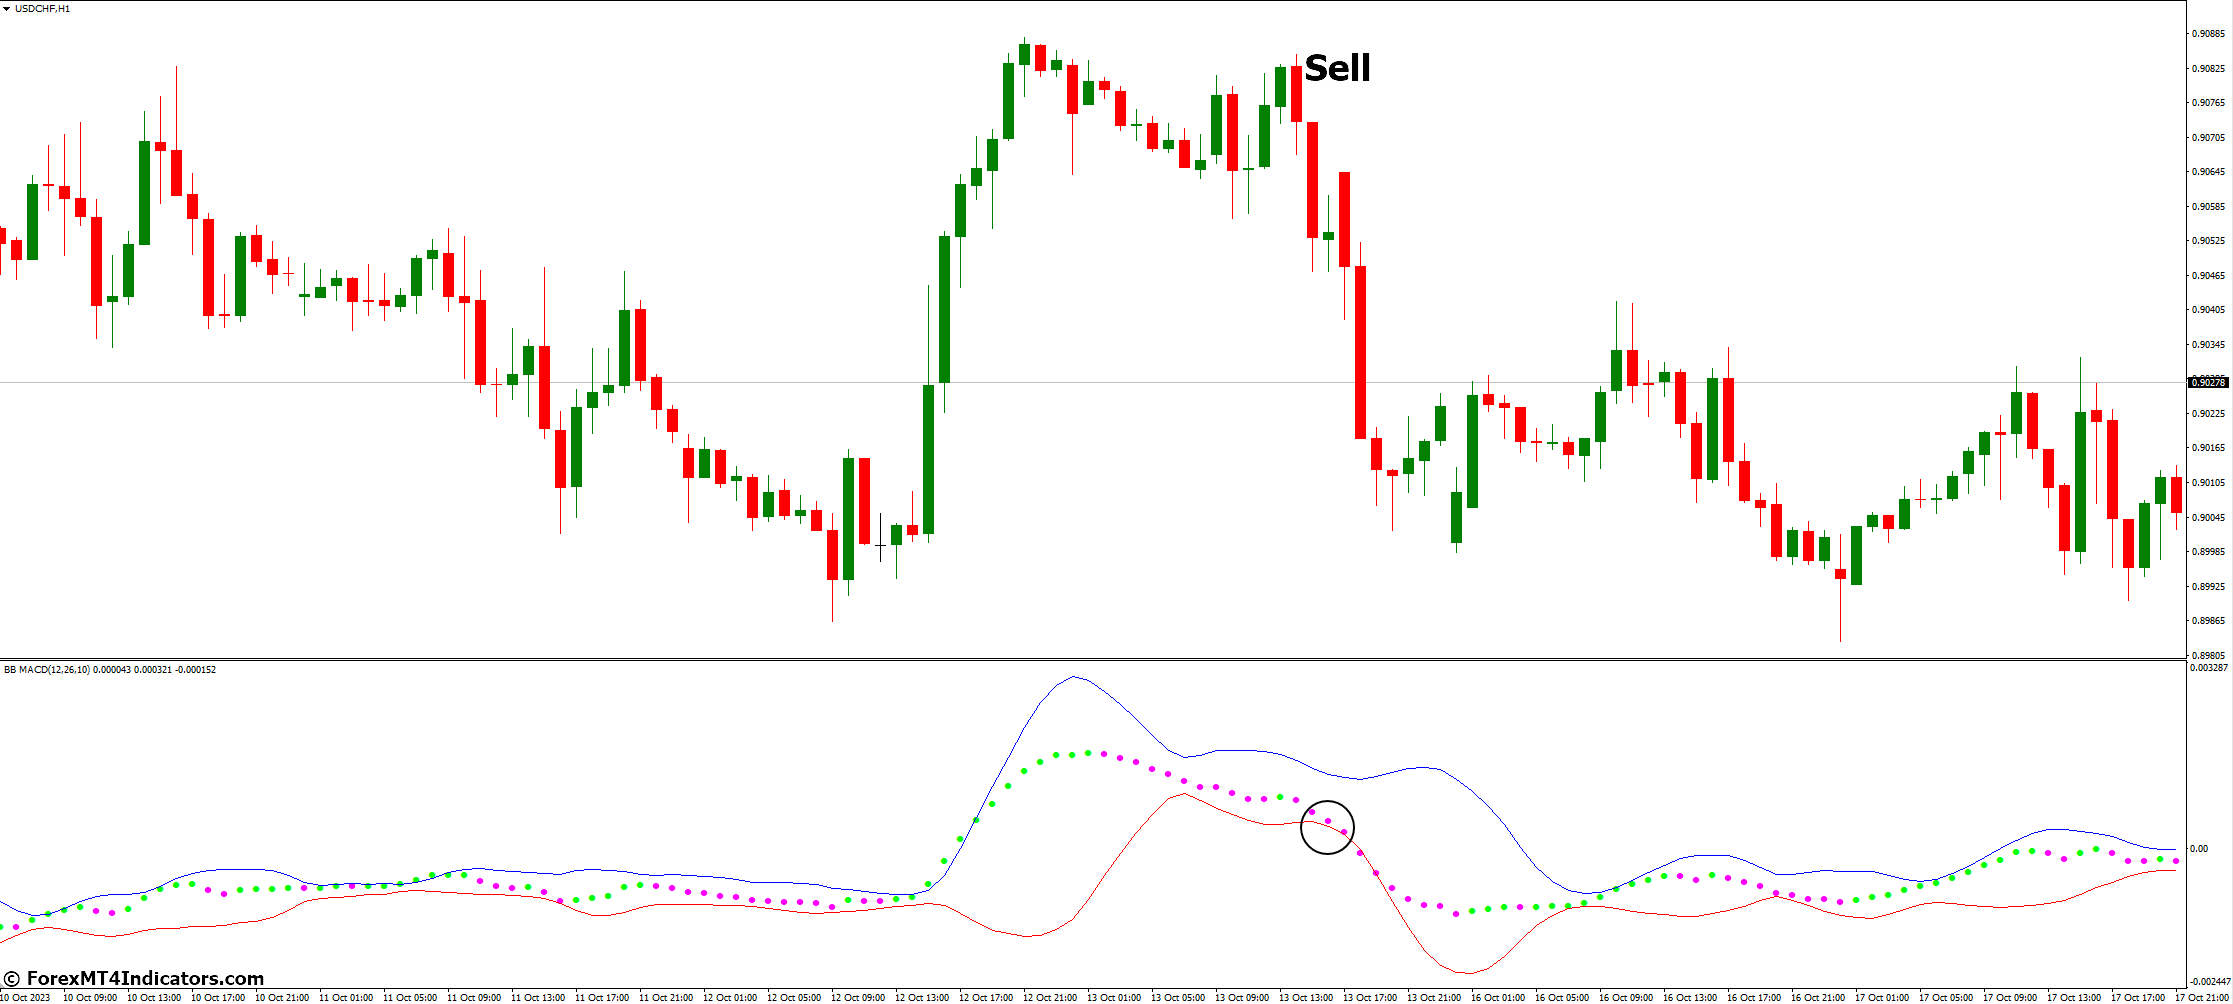 How to Trade with BB MACD MT4 Indicator - Sell Entry